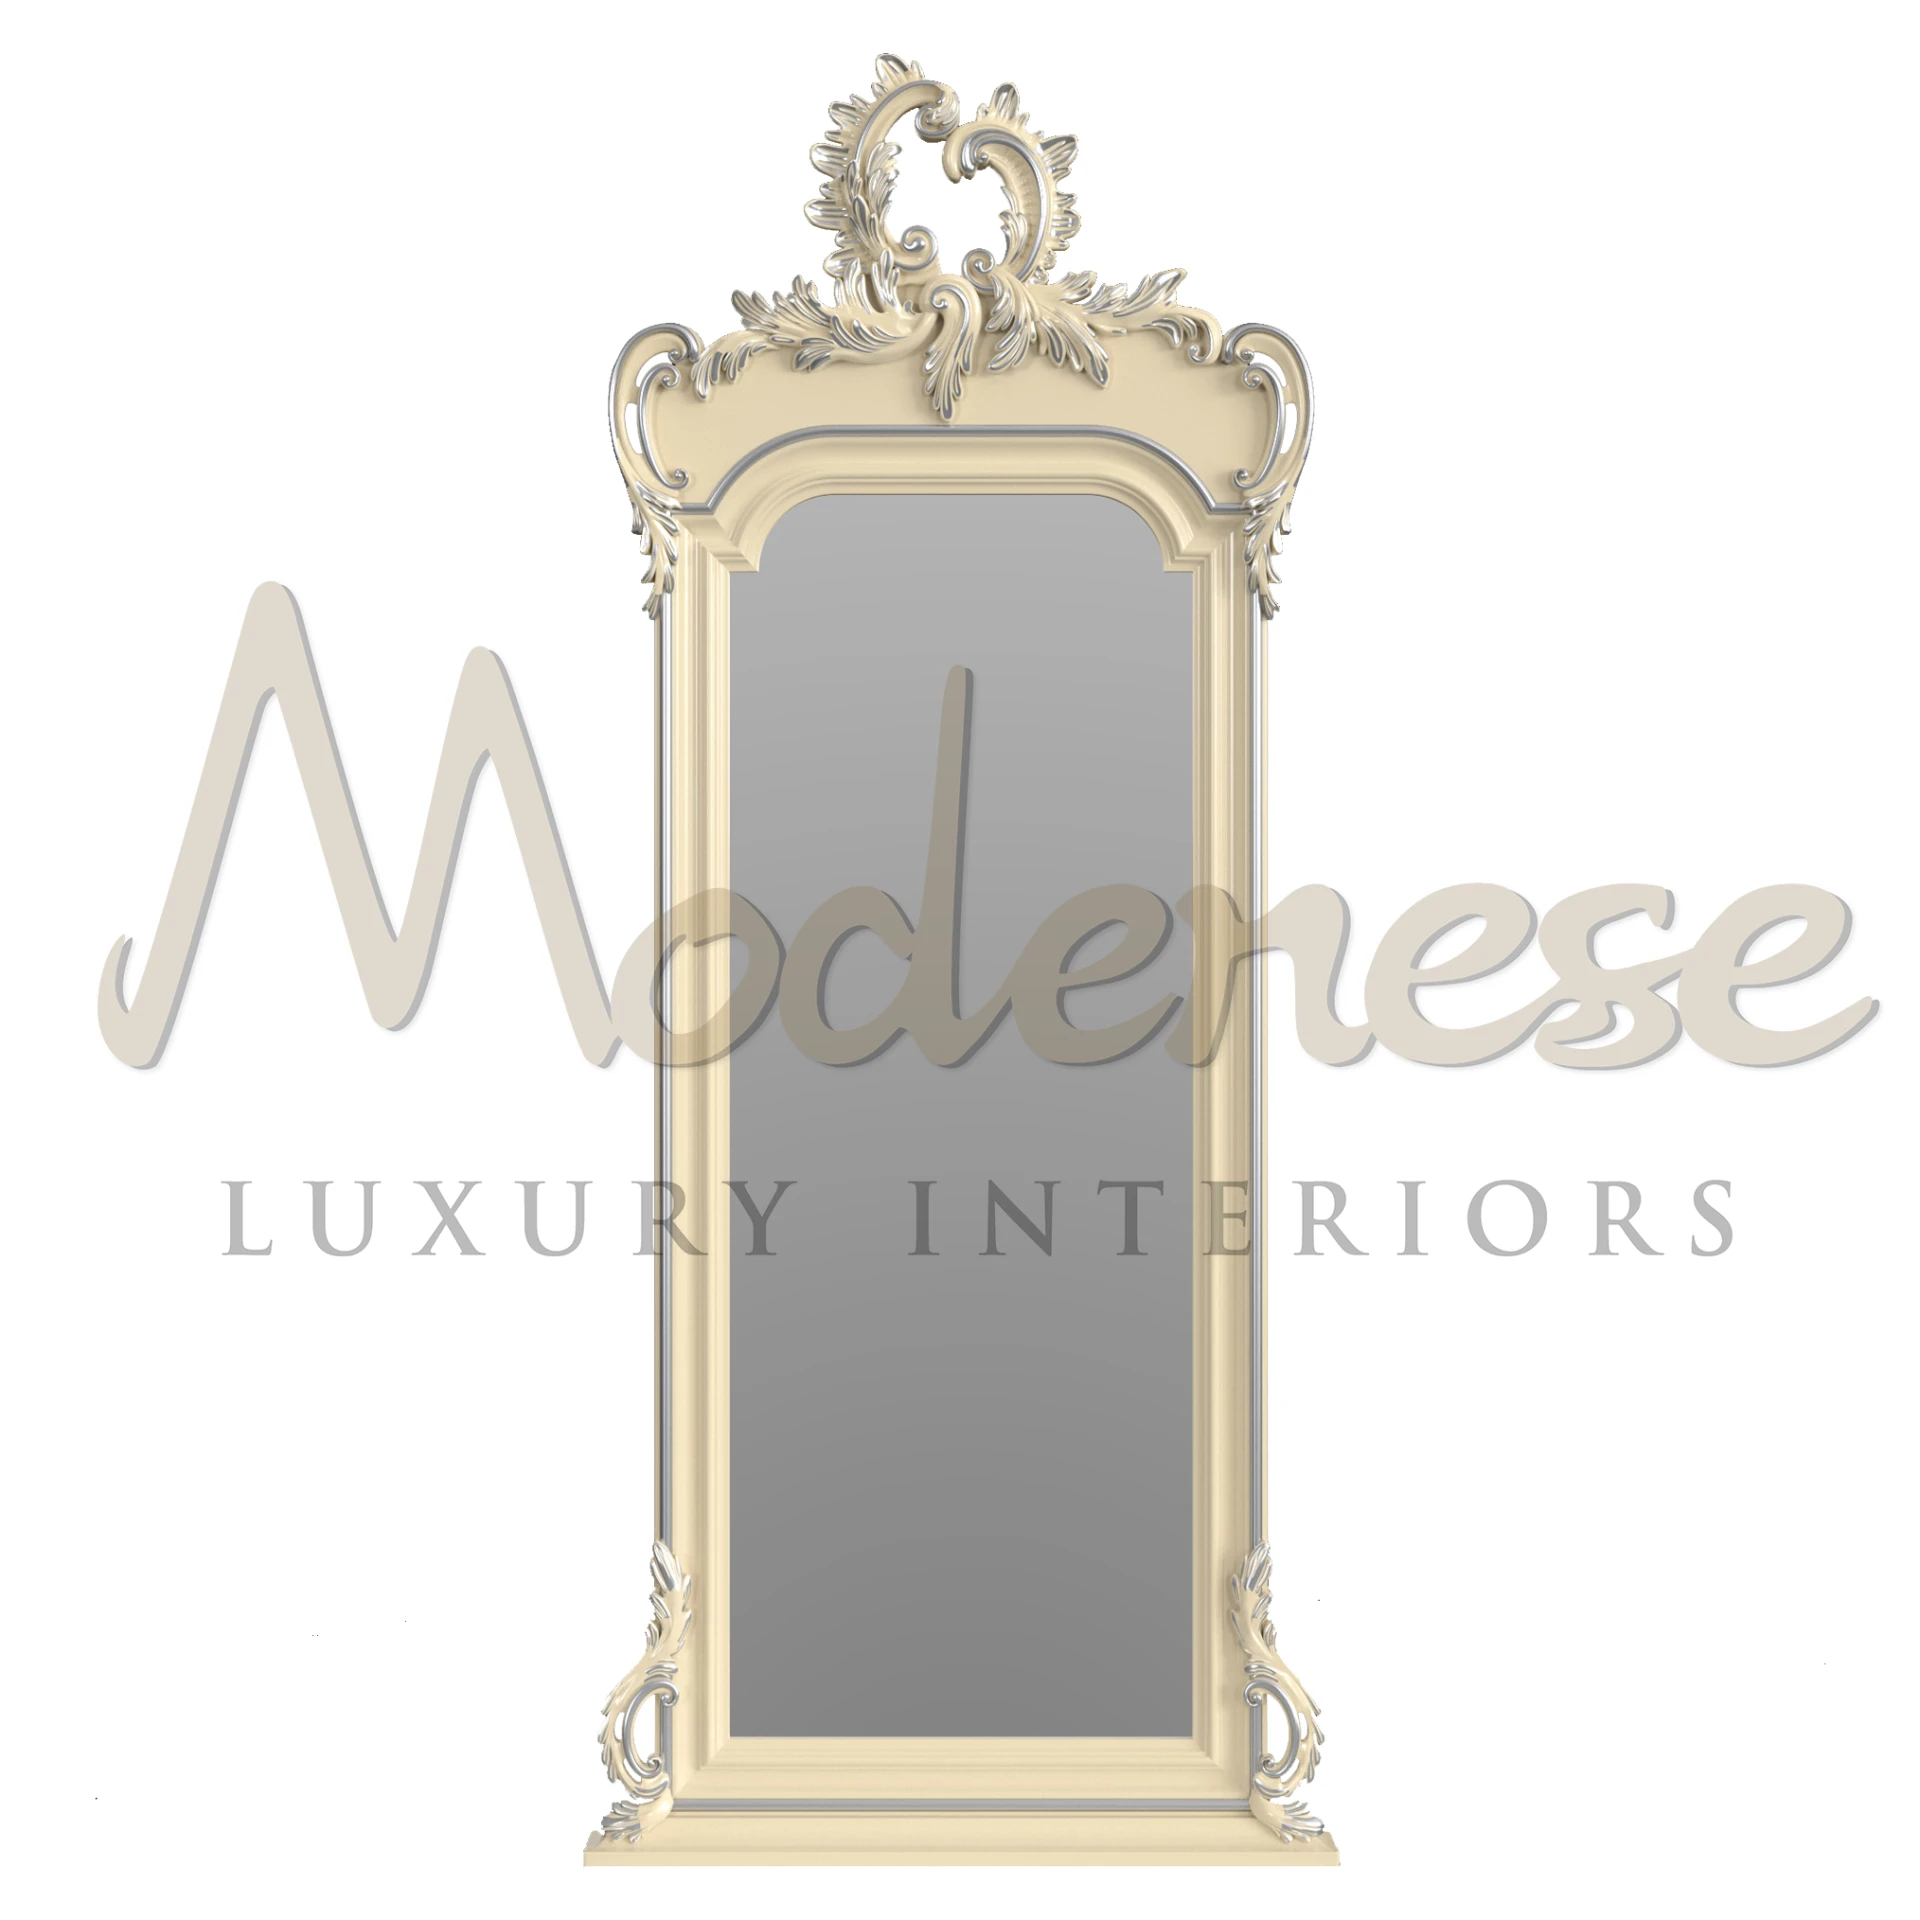 Classic Style Standing Mirror, with its unique character and handmade Italian elegance, brings luxury to interior design.